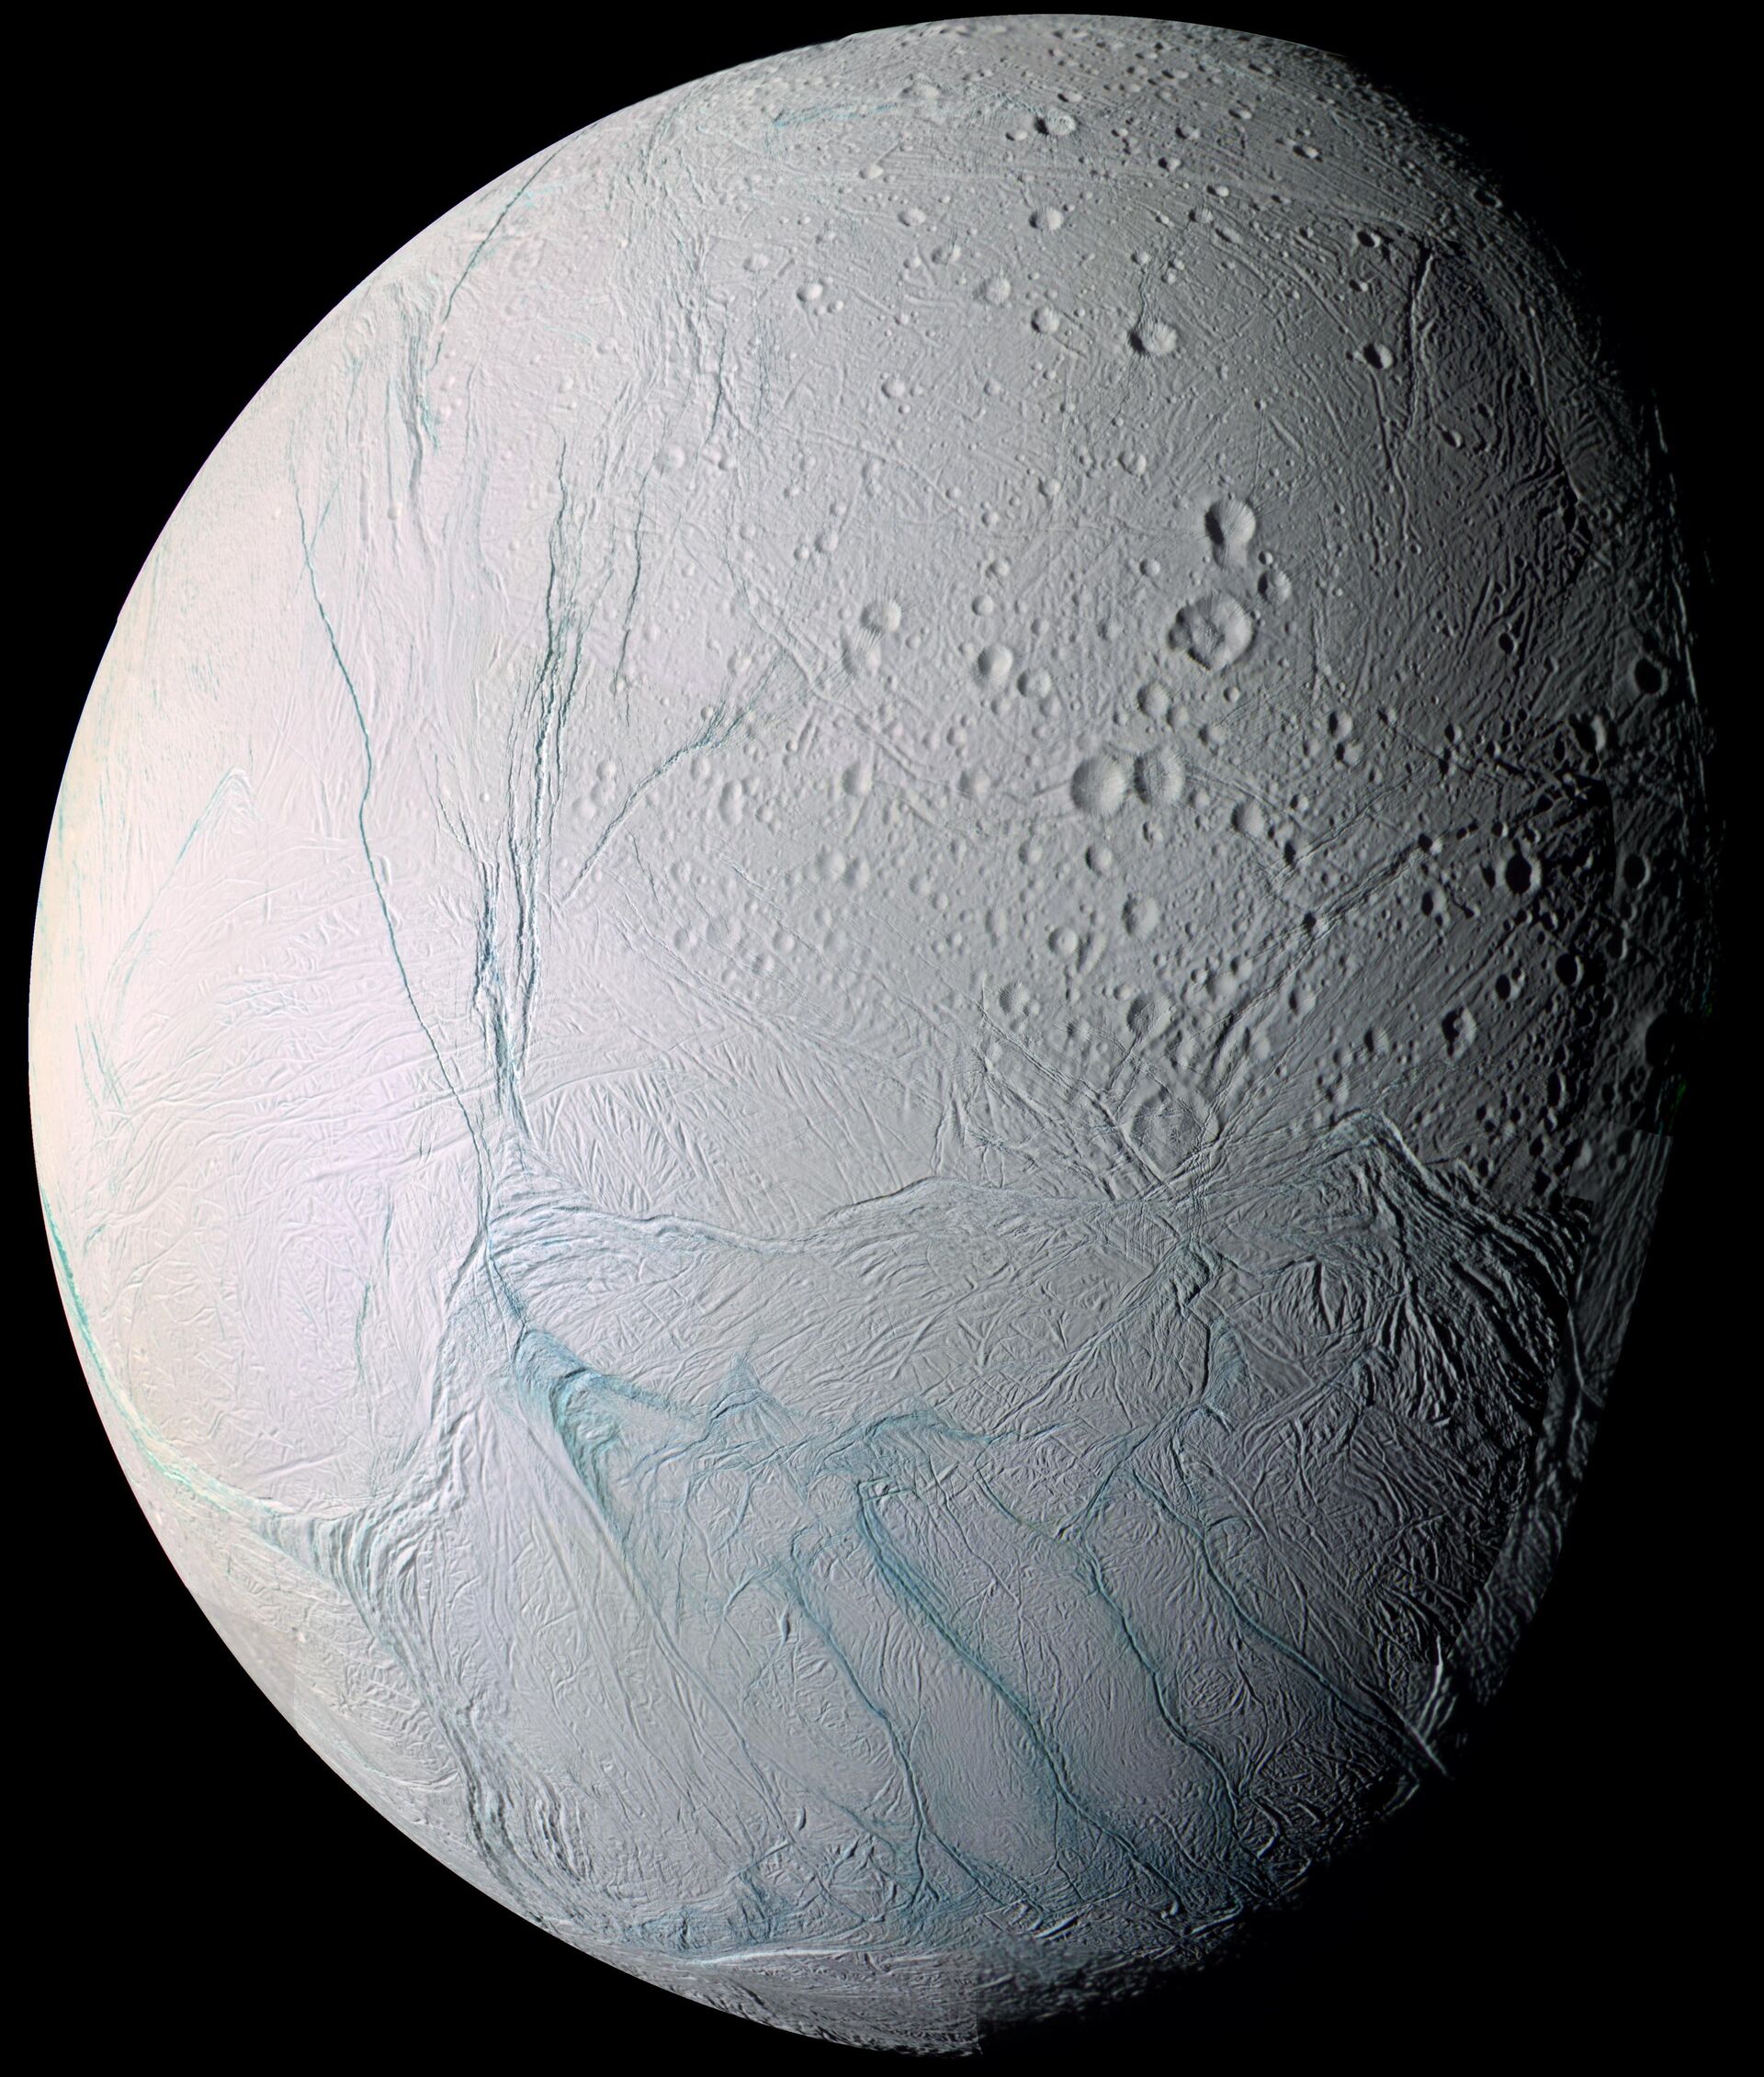 Saturn's moon Enceladus, which may be lined with the same underwater vents that created life on Earth. - Sputnik Србија, 1920, 31.05.2023